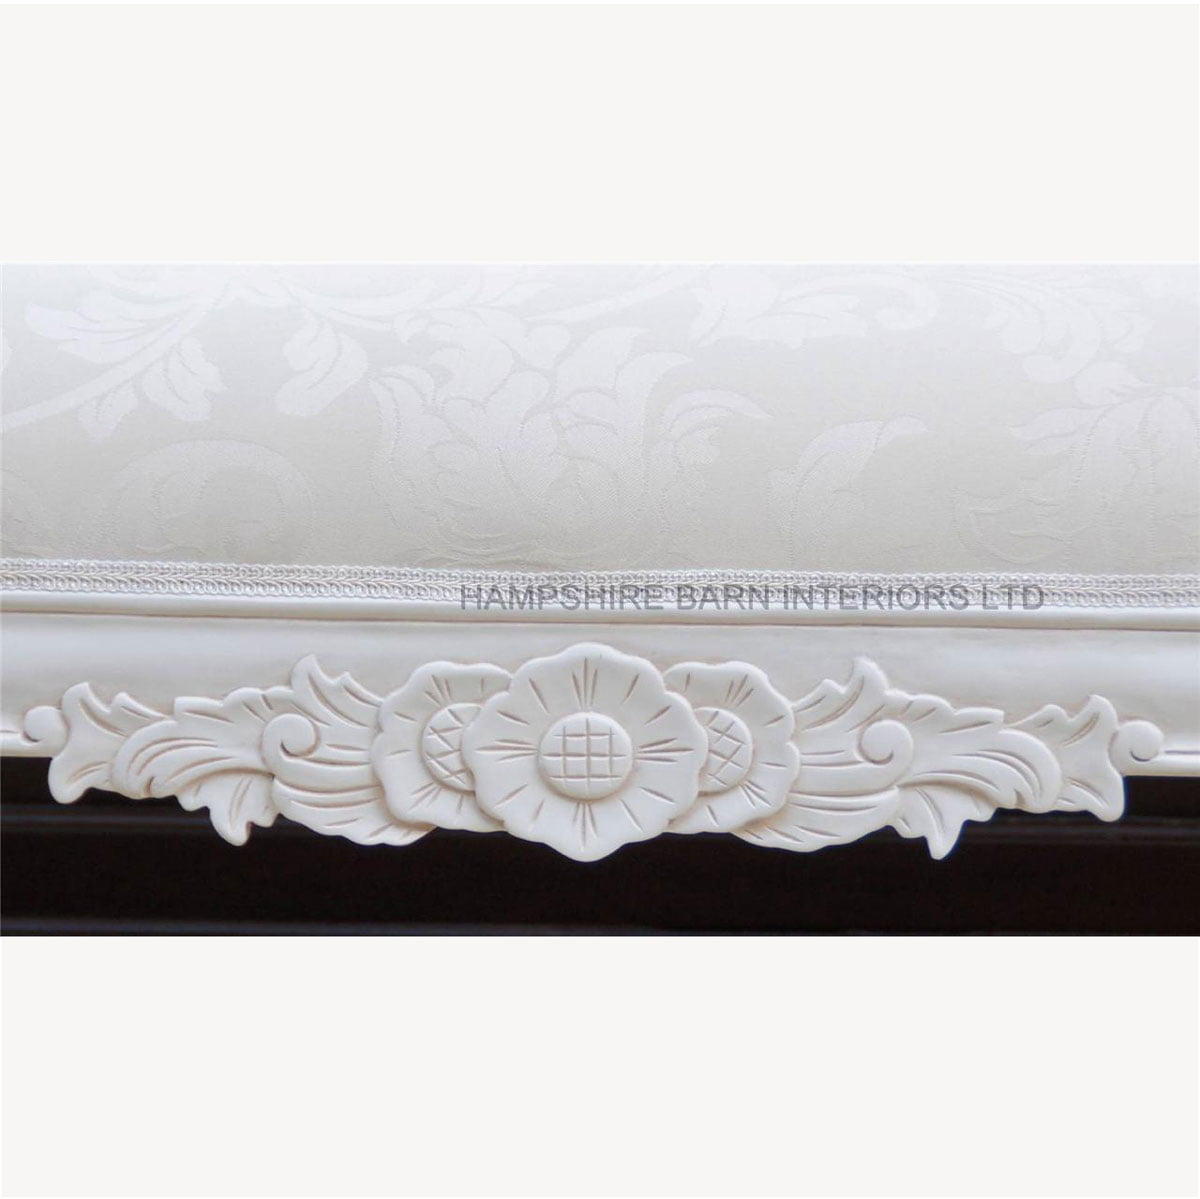 Antique White Ornate Medium Hampshire Chaise With Ivory Cream Fabric With Crystal Buttoning 2 - Hampshire Barn Interiors - Antique White Ornate Medium Hampshire Chaise With Ivory Cream Fabric With Crystal Buttoning -